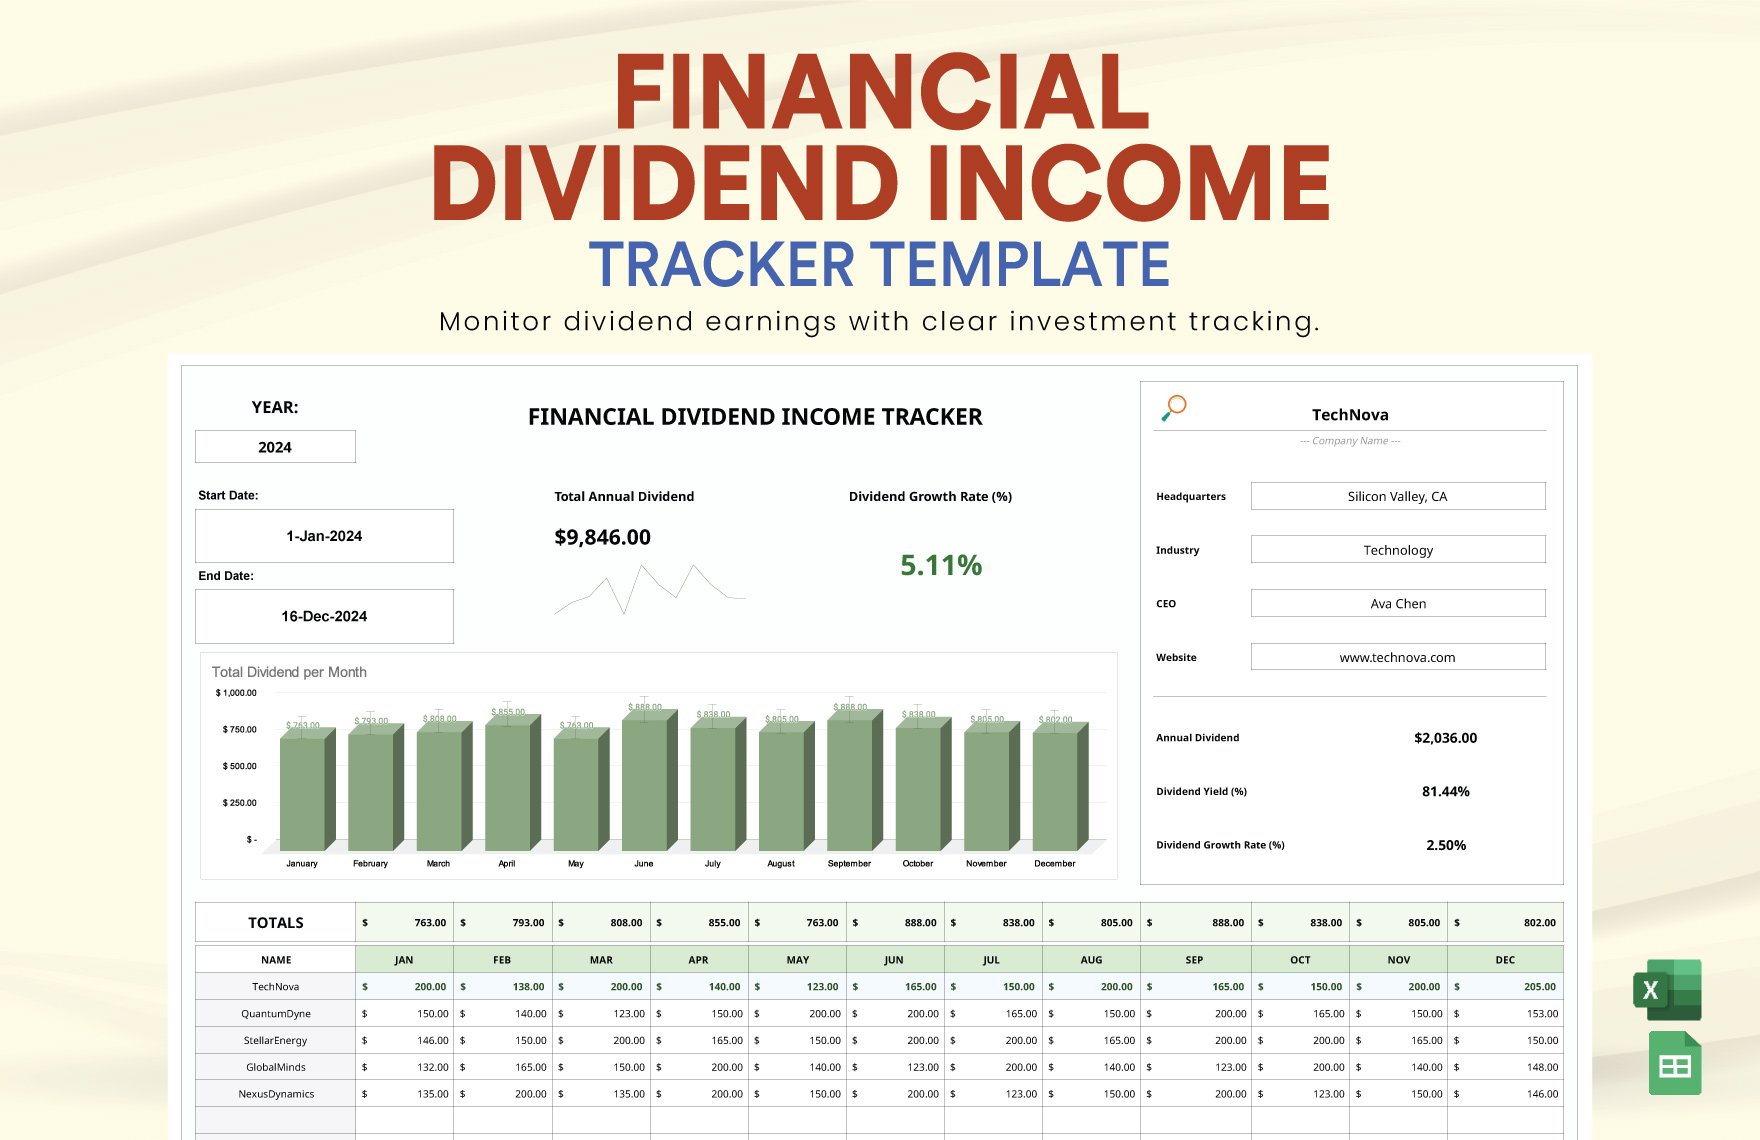 Financial Dividend Income Tracker Template